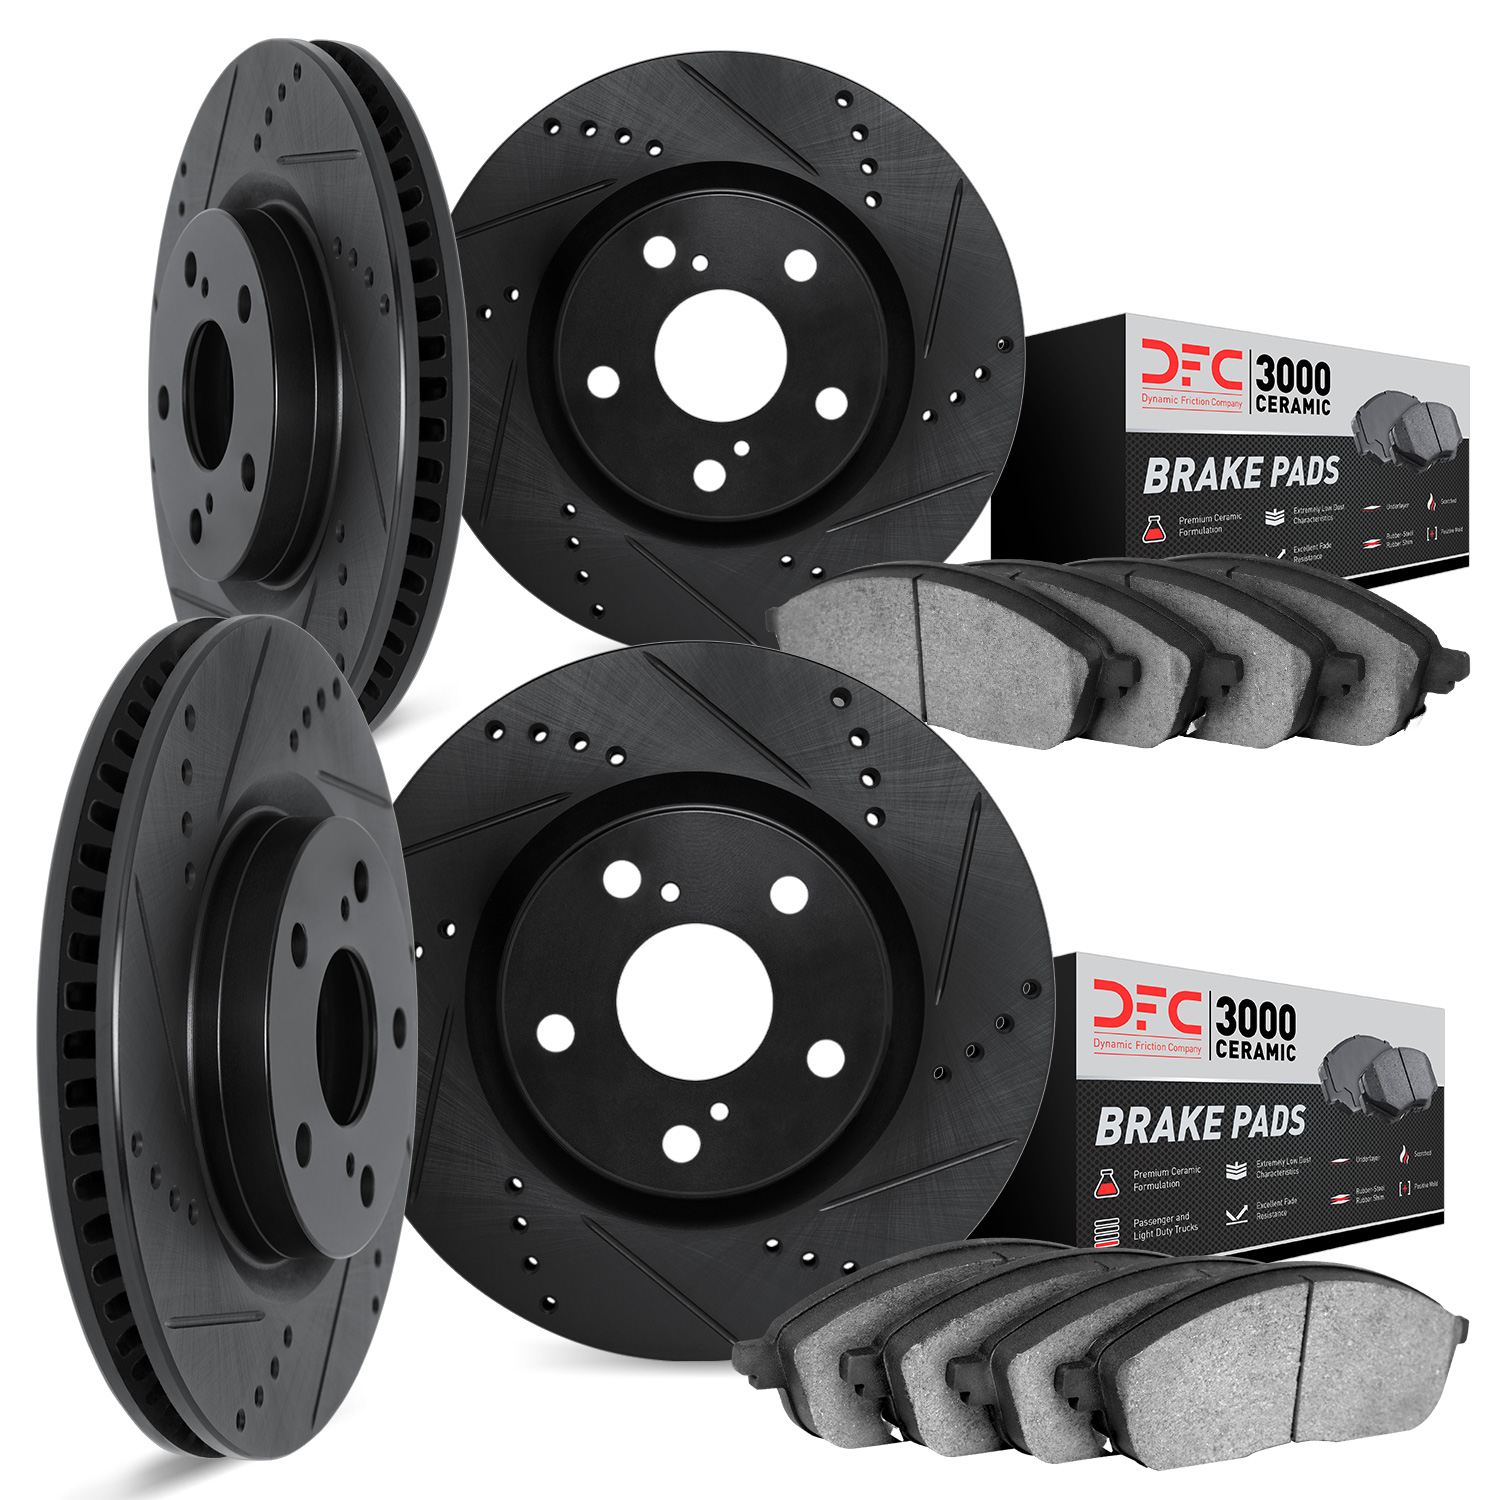 8304-13031 Drilled/Slotted Brake Rotors with 3000-Series Ceramic Brake Pads Kit [Black], 2005-2007 Subaru, Position: Front and R